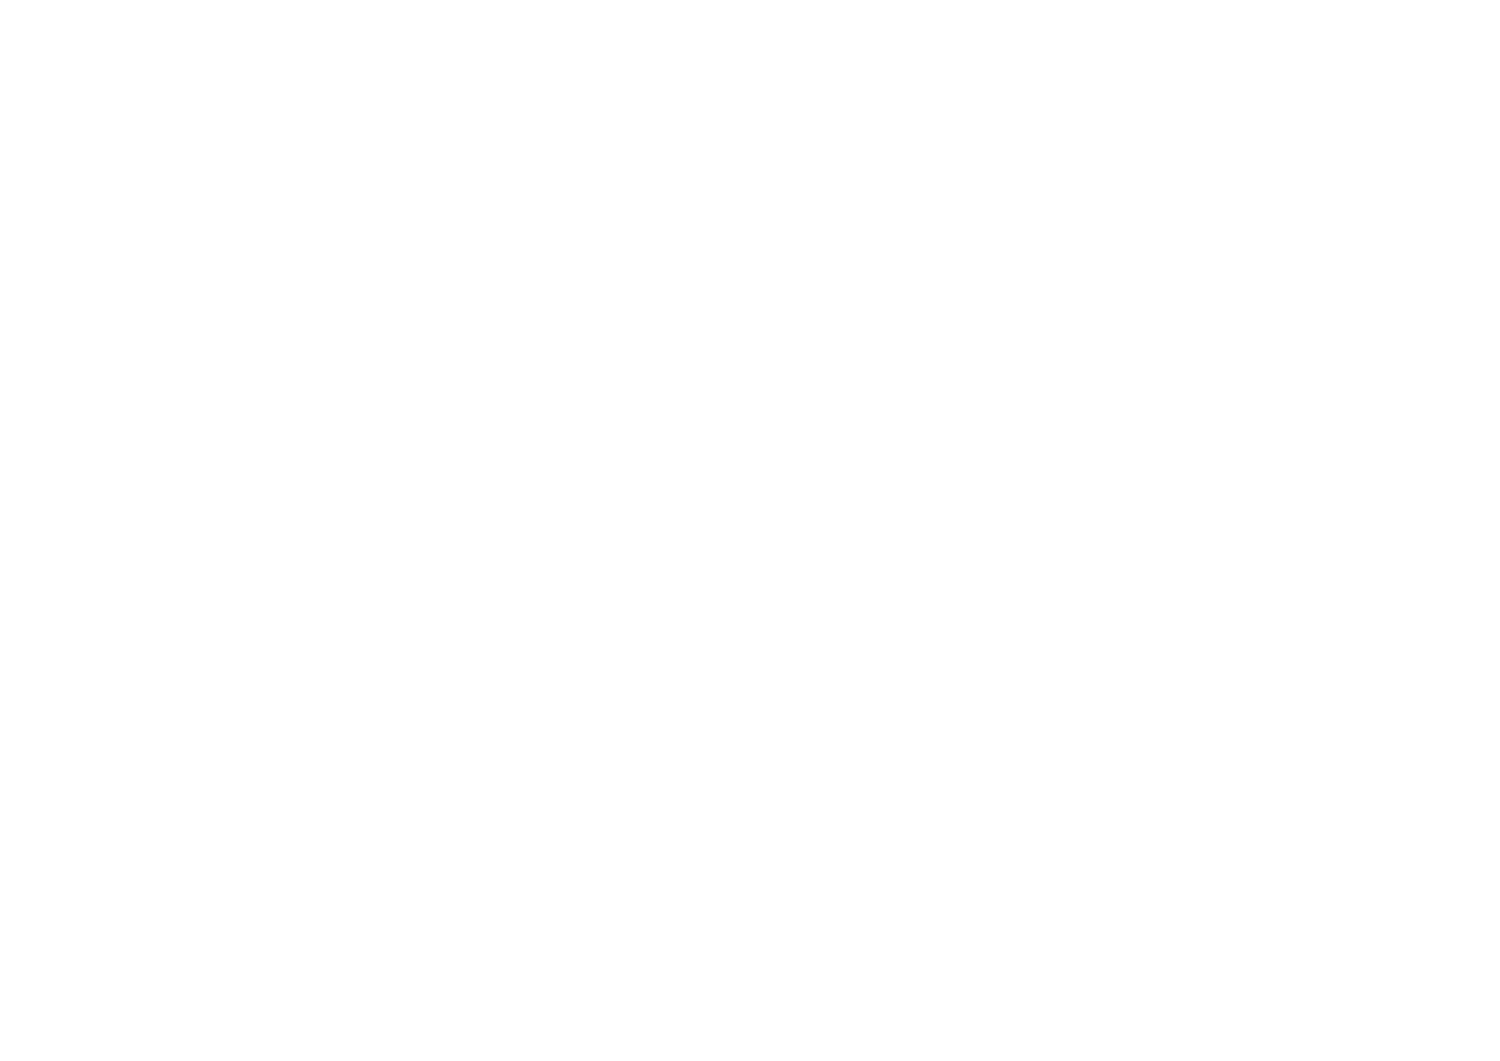 FLOWER COUTURE